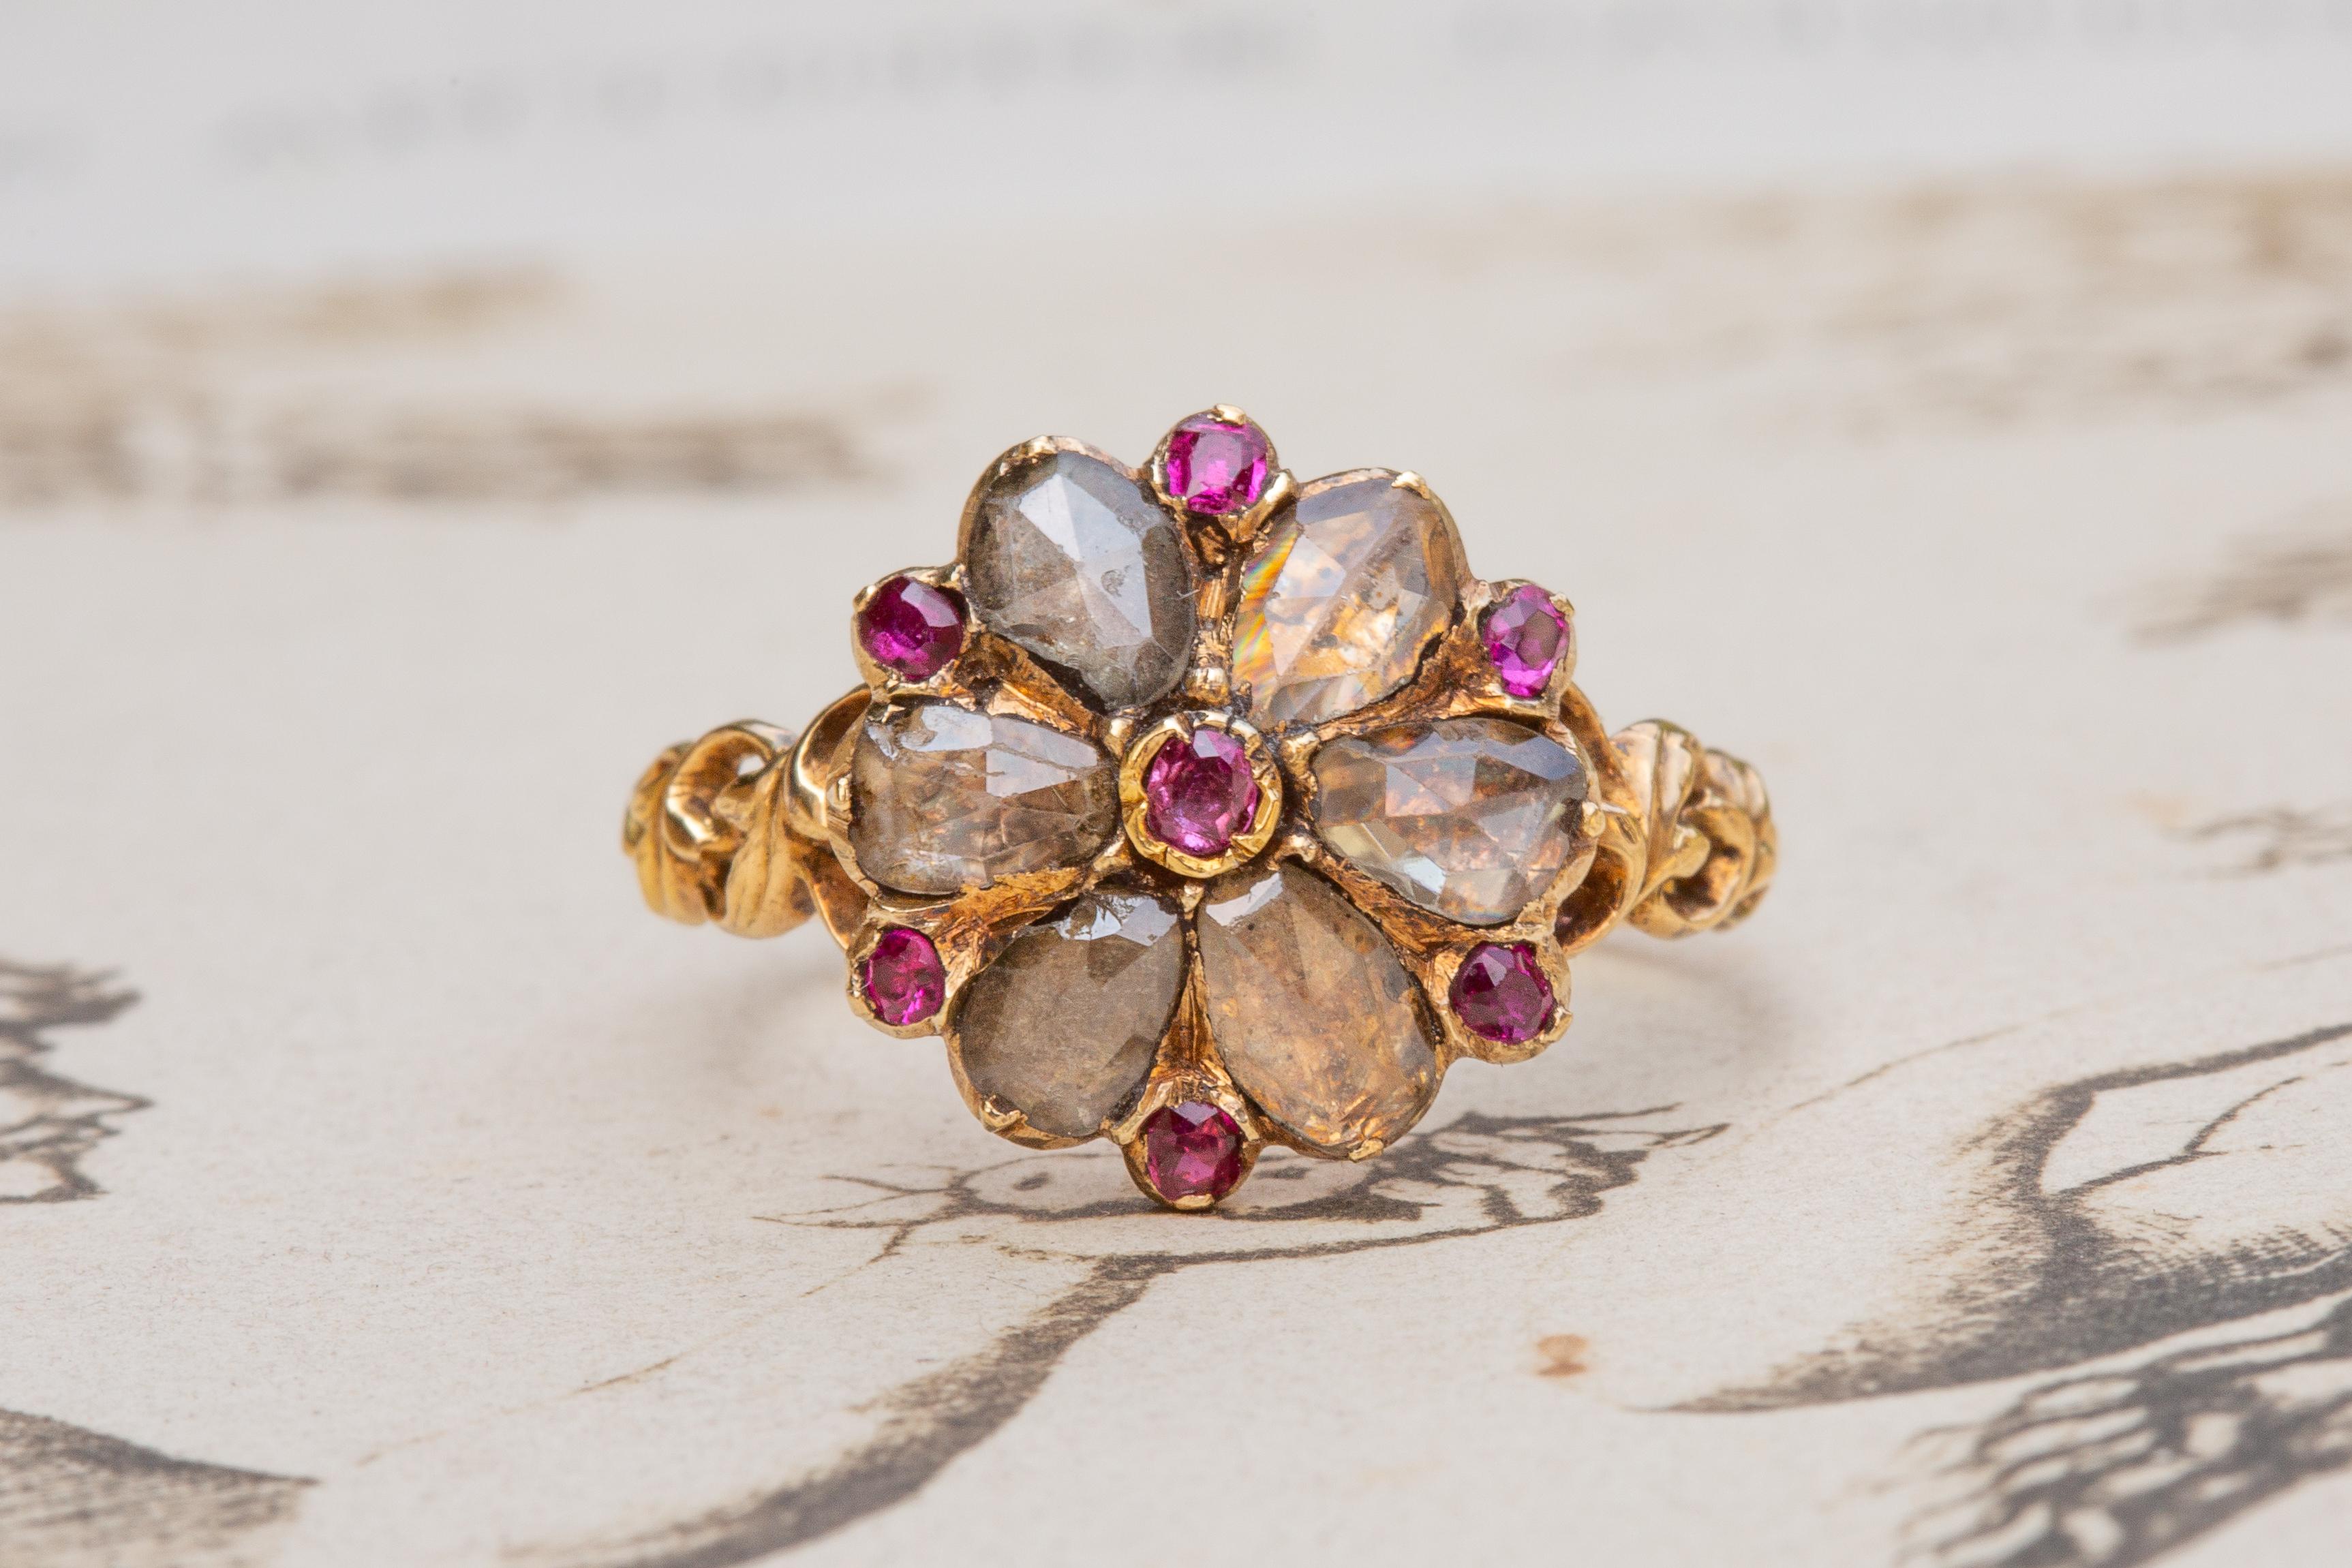 A sublime hard-to-find antique French flower cluster ring dating to the very early 19th century, circa 1800-1820. A superb example of fine Georgian period jewellery, this ring was crafted in 18K gold and displays exceptional craftsmanship. The